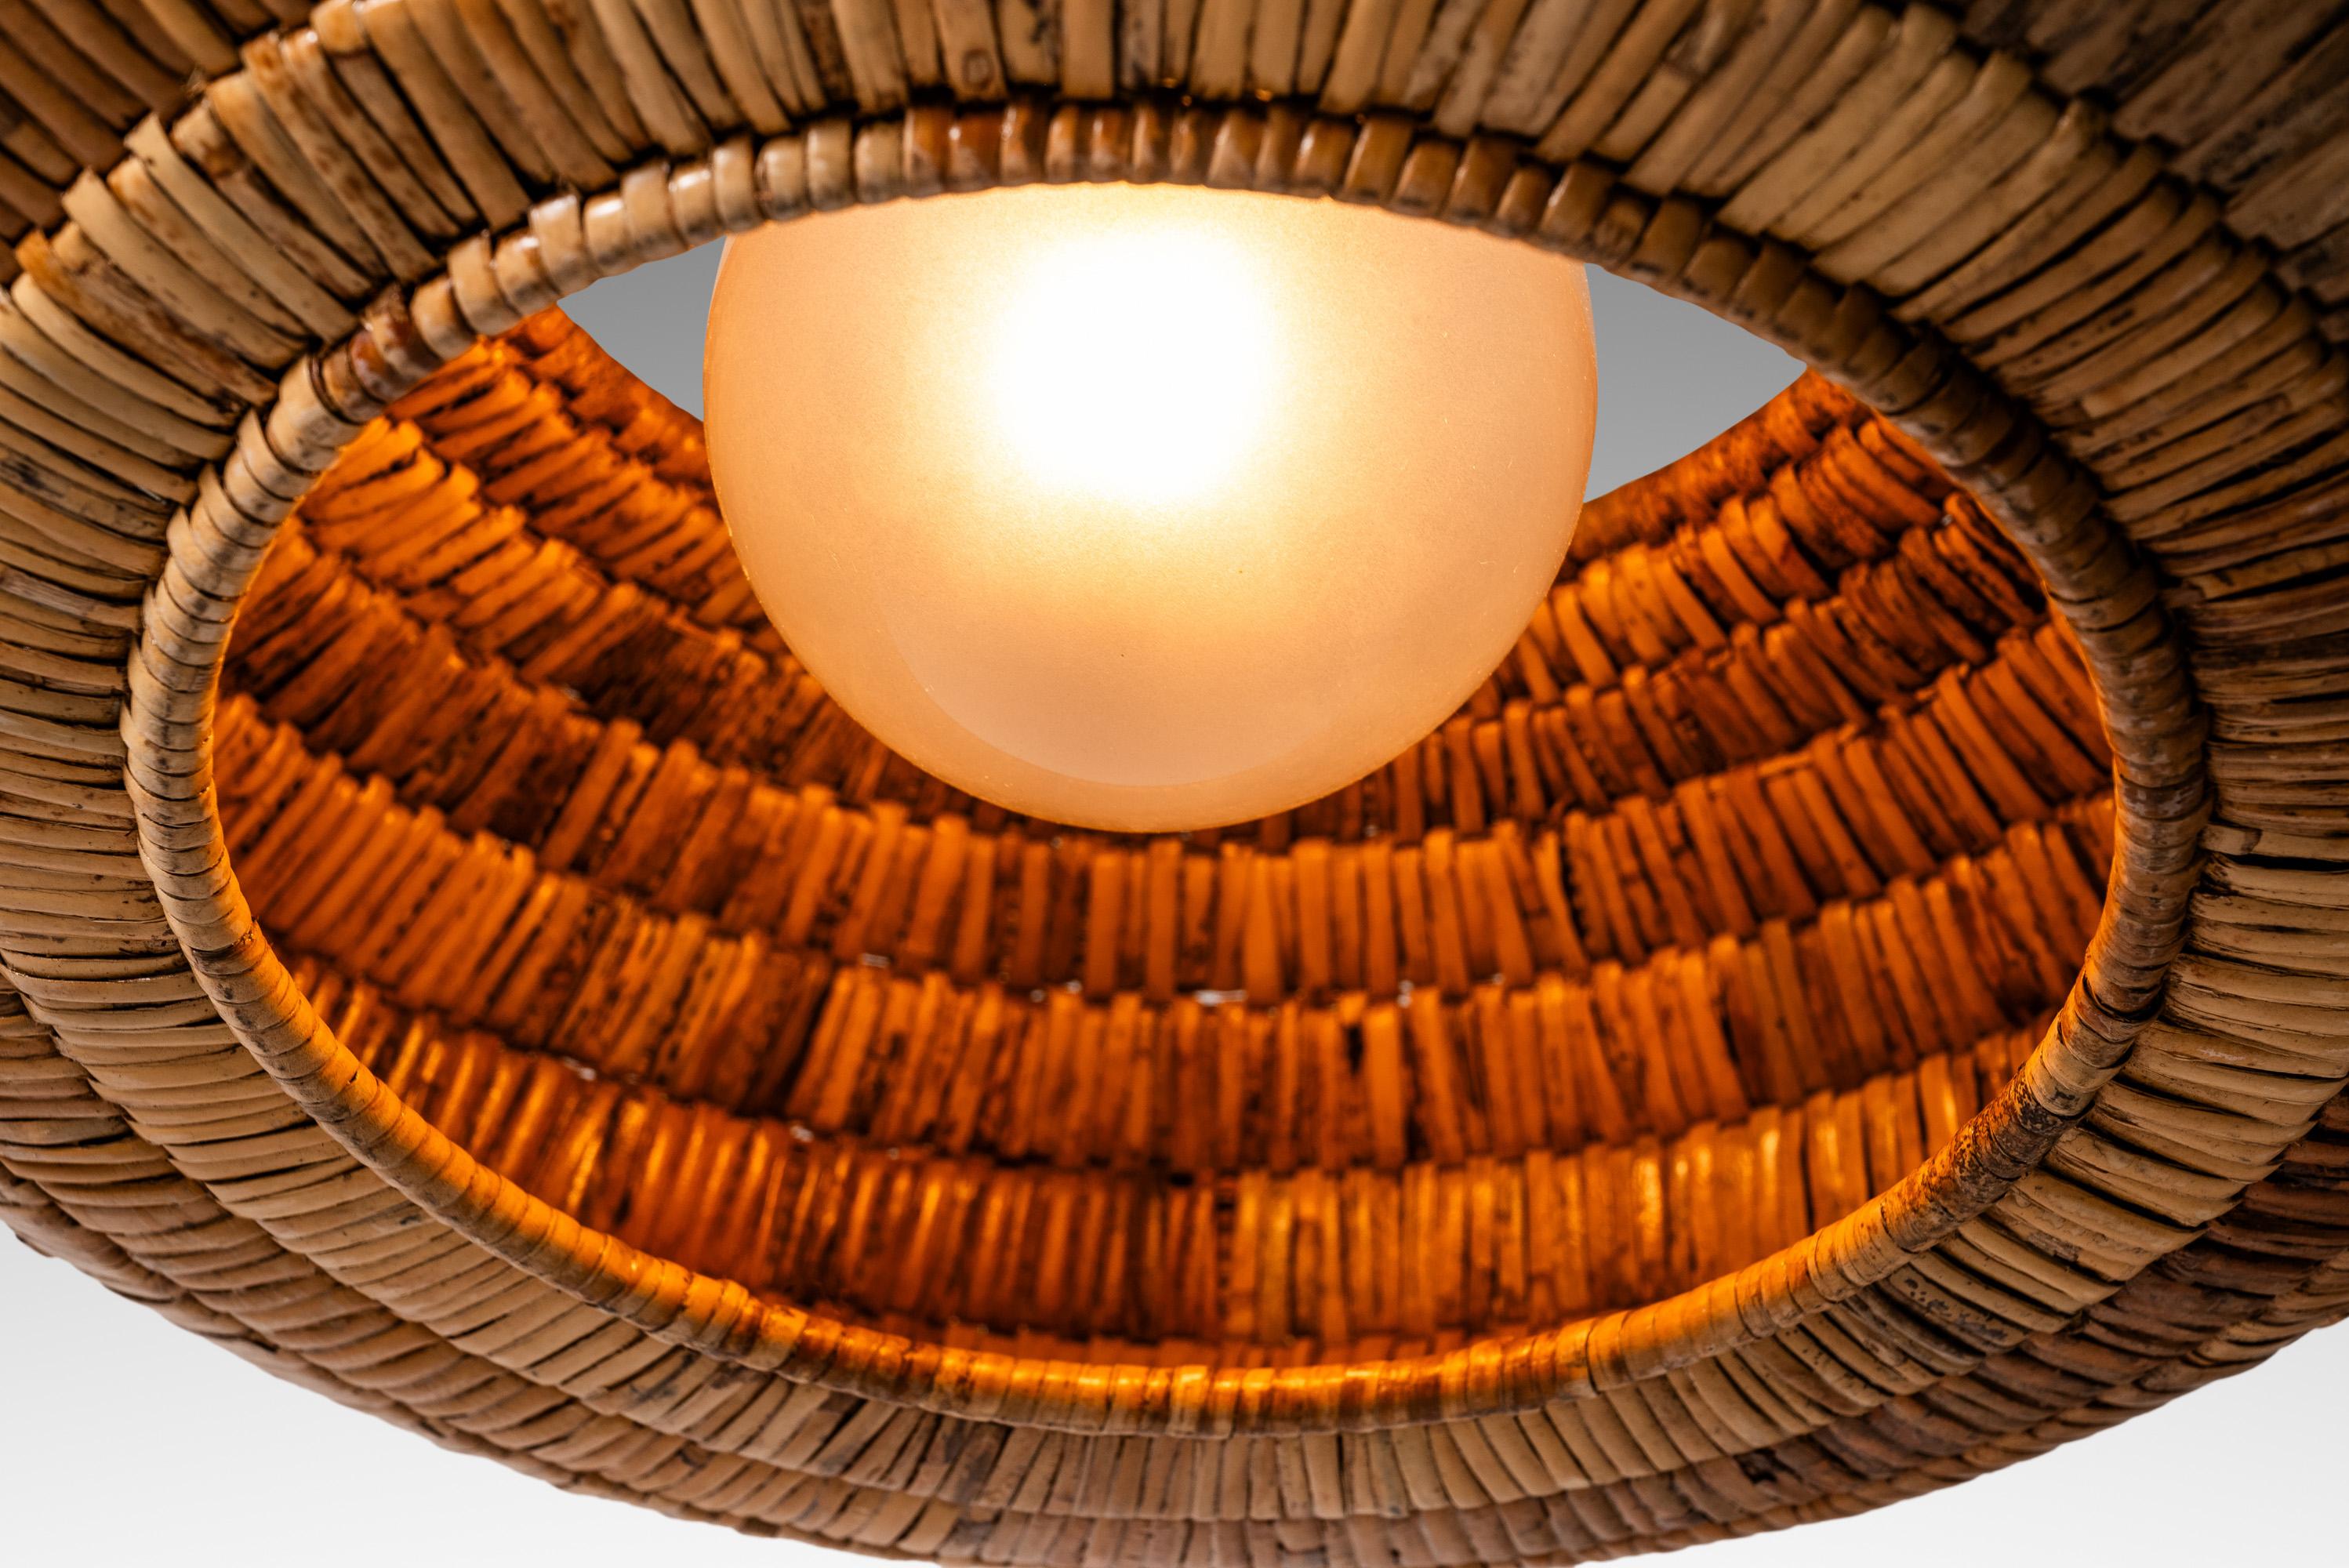 Contemporary Mid-Century Rattan Ceiling Lamp by Breuer for Troy Lighting, USA, c. 2000s For Sale